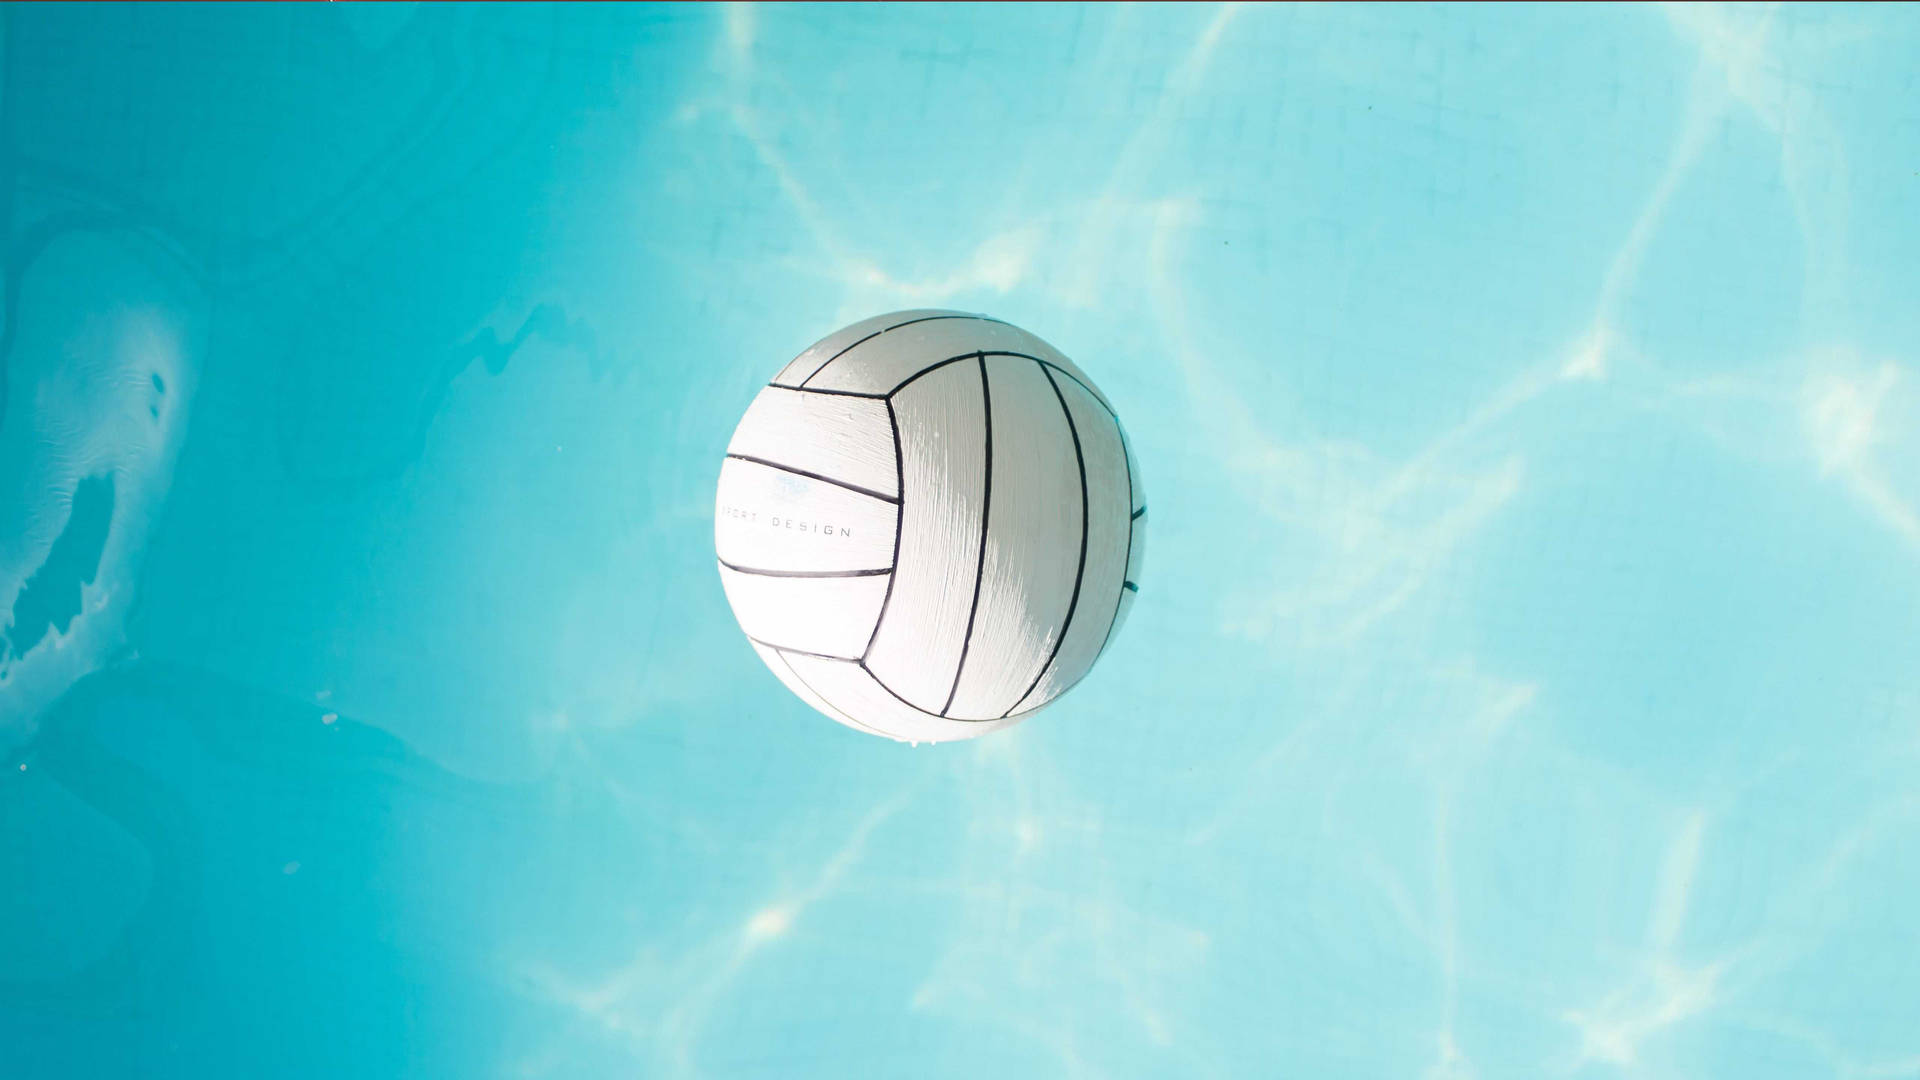 Floating Volleyball 4k